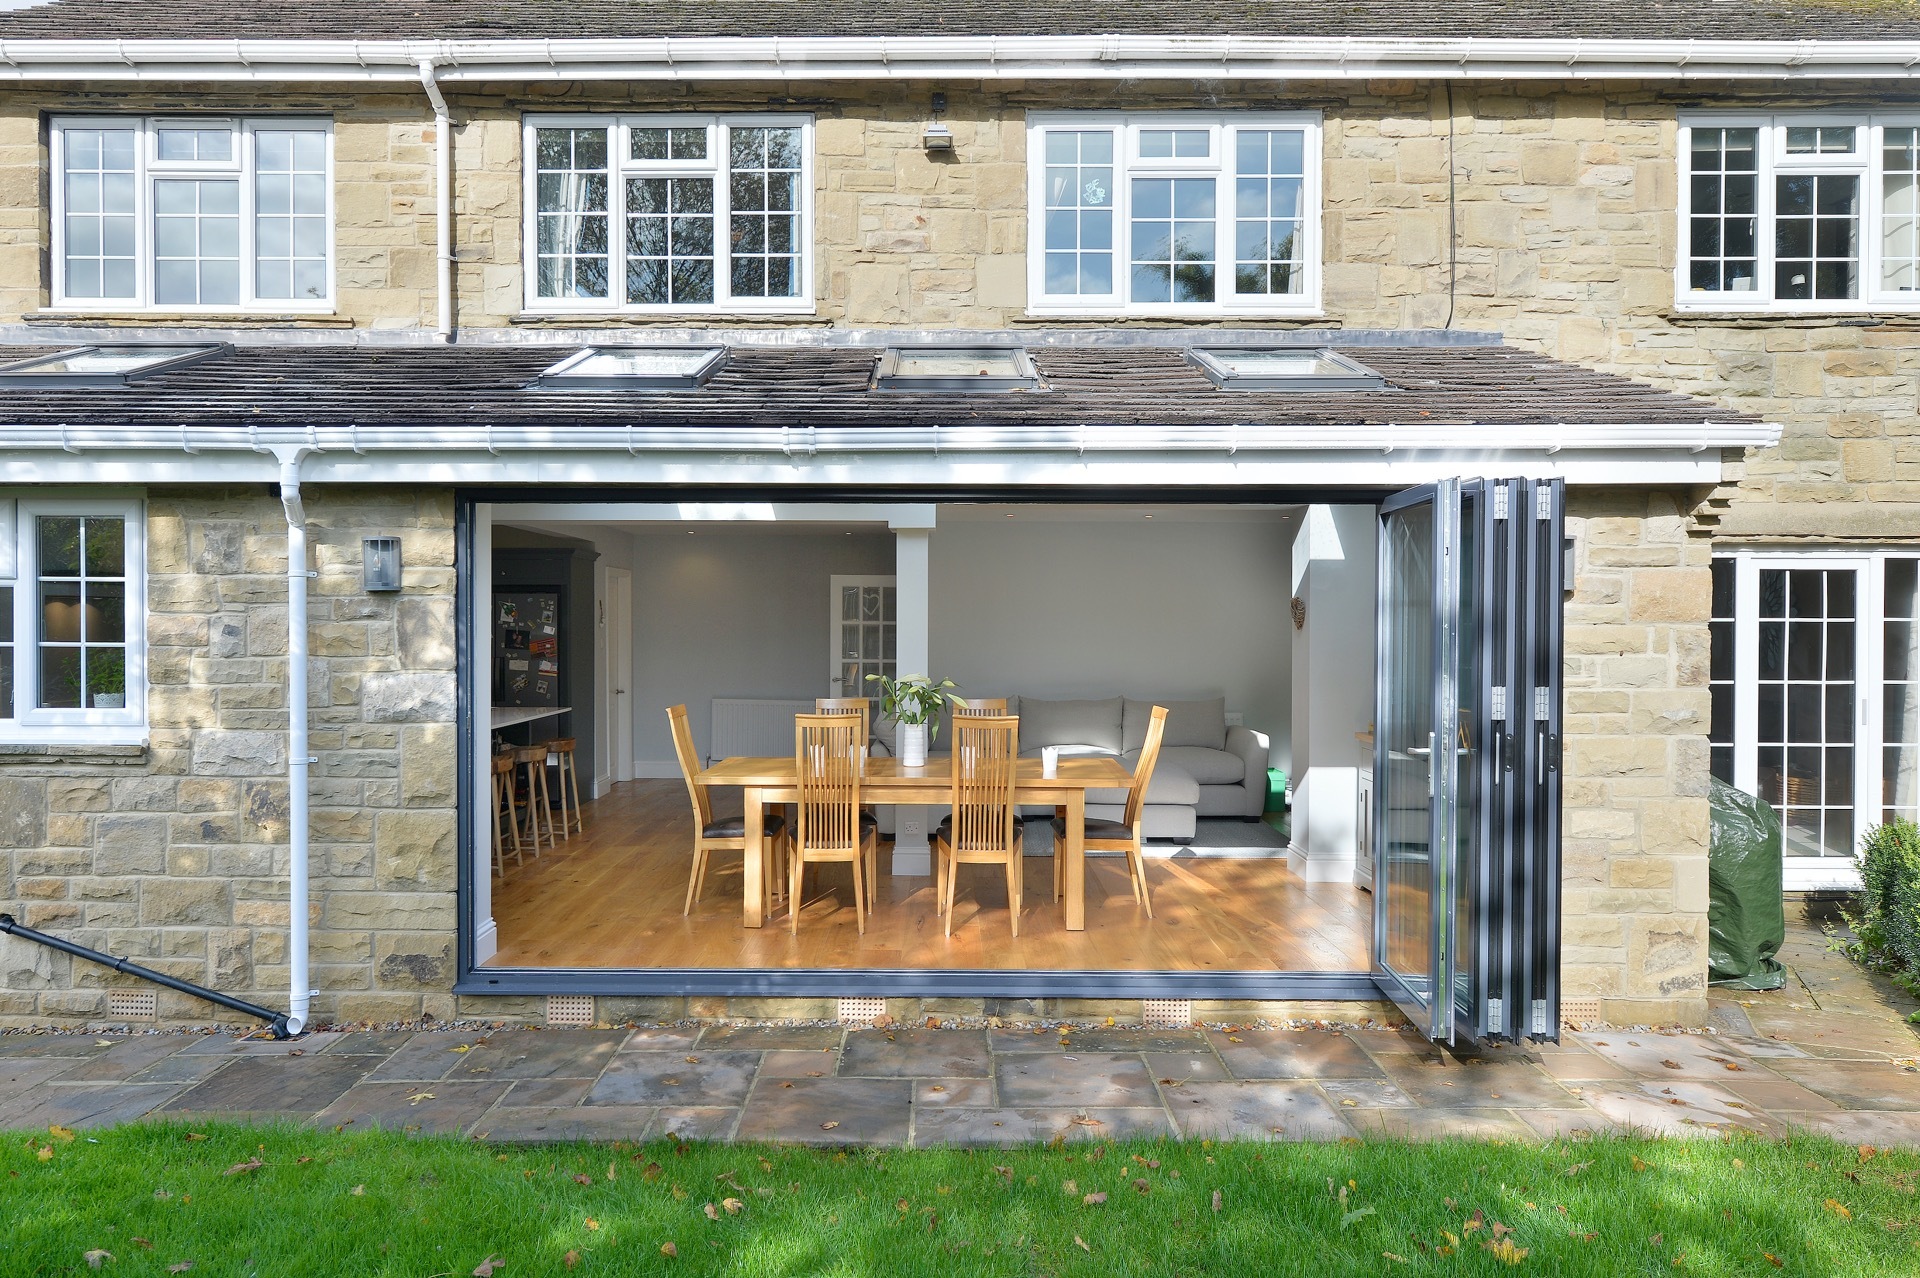 Bifold doors open on to the garden from the dining area